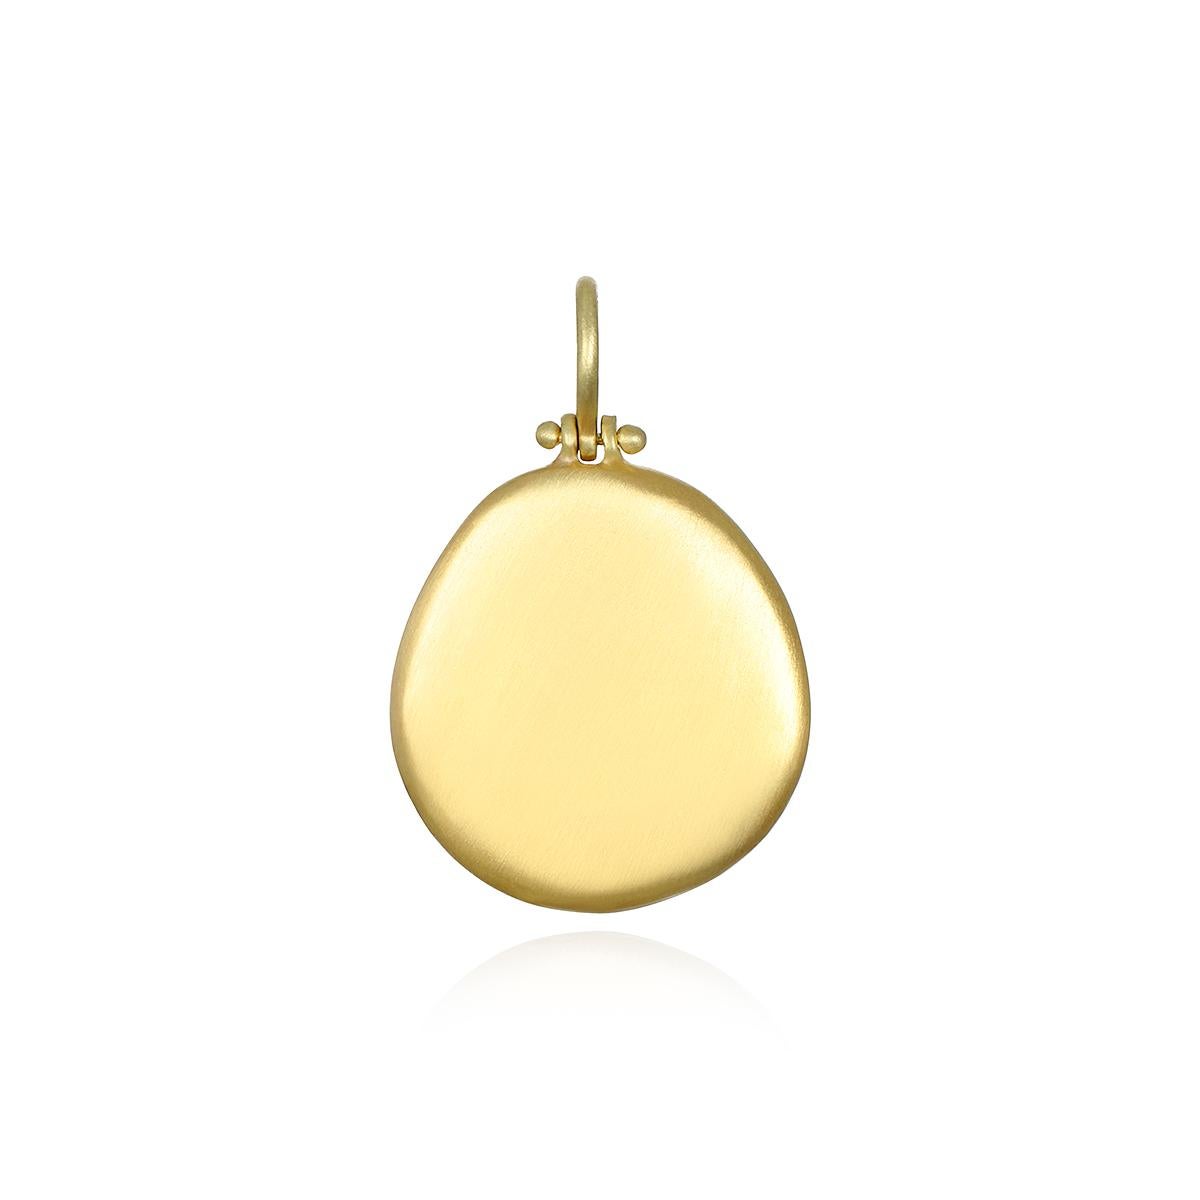 Versatile and easy to wear, Faye Kim's popular 18 Karat Gold Hinged Dog Tag Pendant is perfect for every day. The pendant is matte-finished and shown on an 18